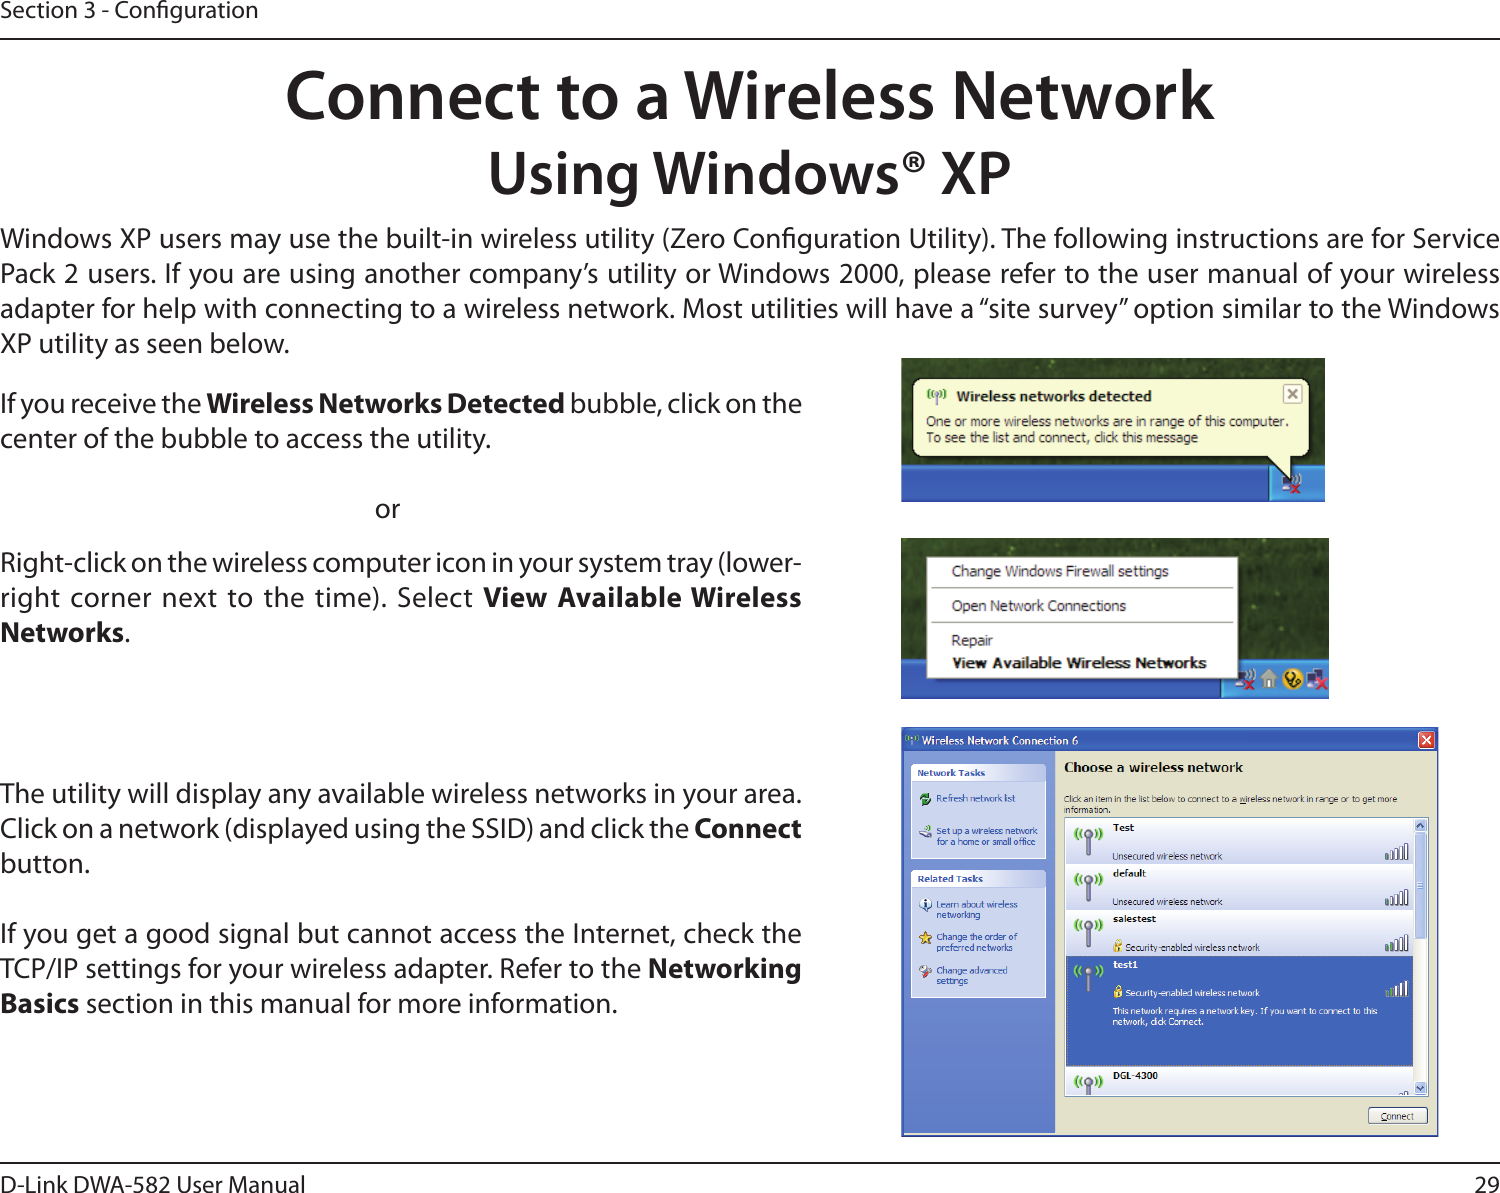 29D-Link DWA-582 User ManualSection 3 - CongurationConnect to a Wireless NetworkUsing Windows® XPWindows XP users may use the built-in wireless utility (Zero Conguration Utility). The following instructions are for Service Pack 2 users. If you are using another company’s utility or Windows 2000, please refer to the user manual of your wireless adapter for help with connecting to a wireless network. Most utilities will have a “site survey” option similar to the Windows XP utility as seen below.Right-click on the wireless computer icon in your system tray (lower-right corner next to the time). Select View Available Wireless Networks.If you receive the Wireless Networks Detected bubble, click on the center of the bubble to access the utility.     orThe utility will display any available wireless networks in your area. Click on a network (displayed using the SSID) and click the Connect button.If you get a good signal but cannot access the Internet, check the TCP/IP settings for your wireless adapter. Refer to the Networking Basics section in this manual for more information.